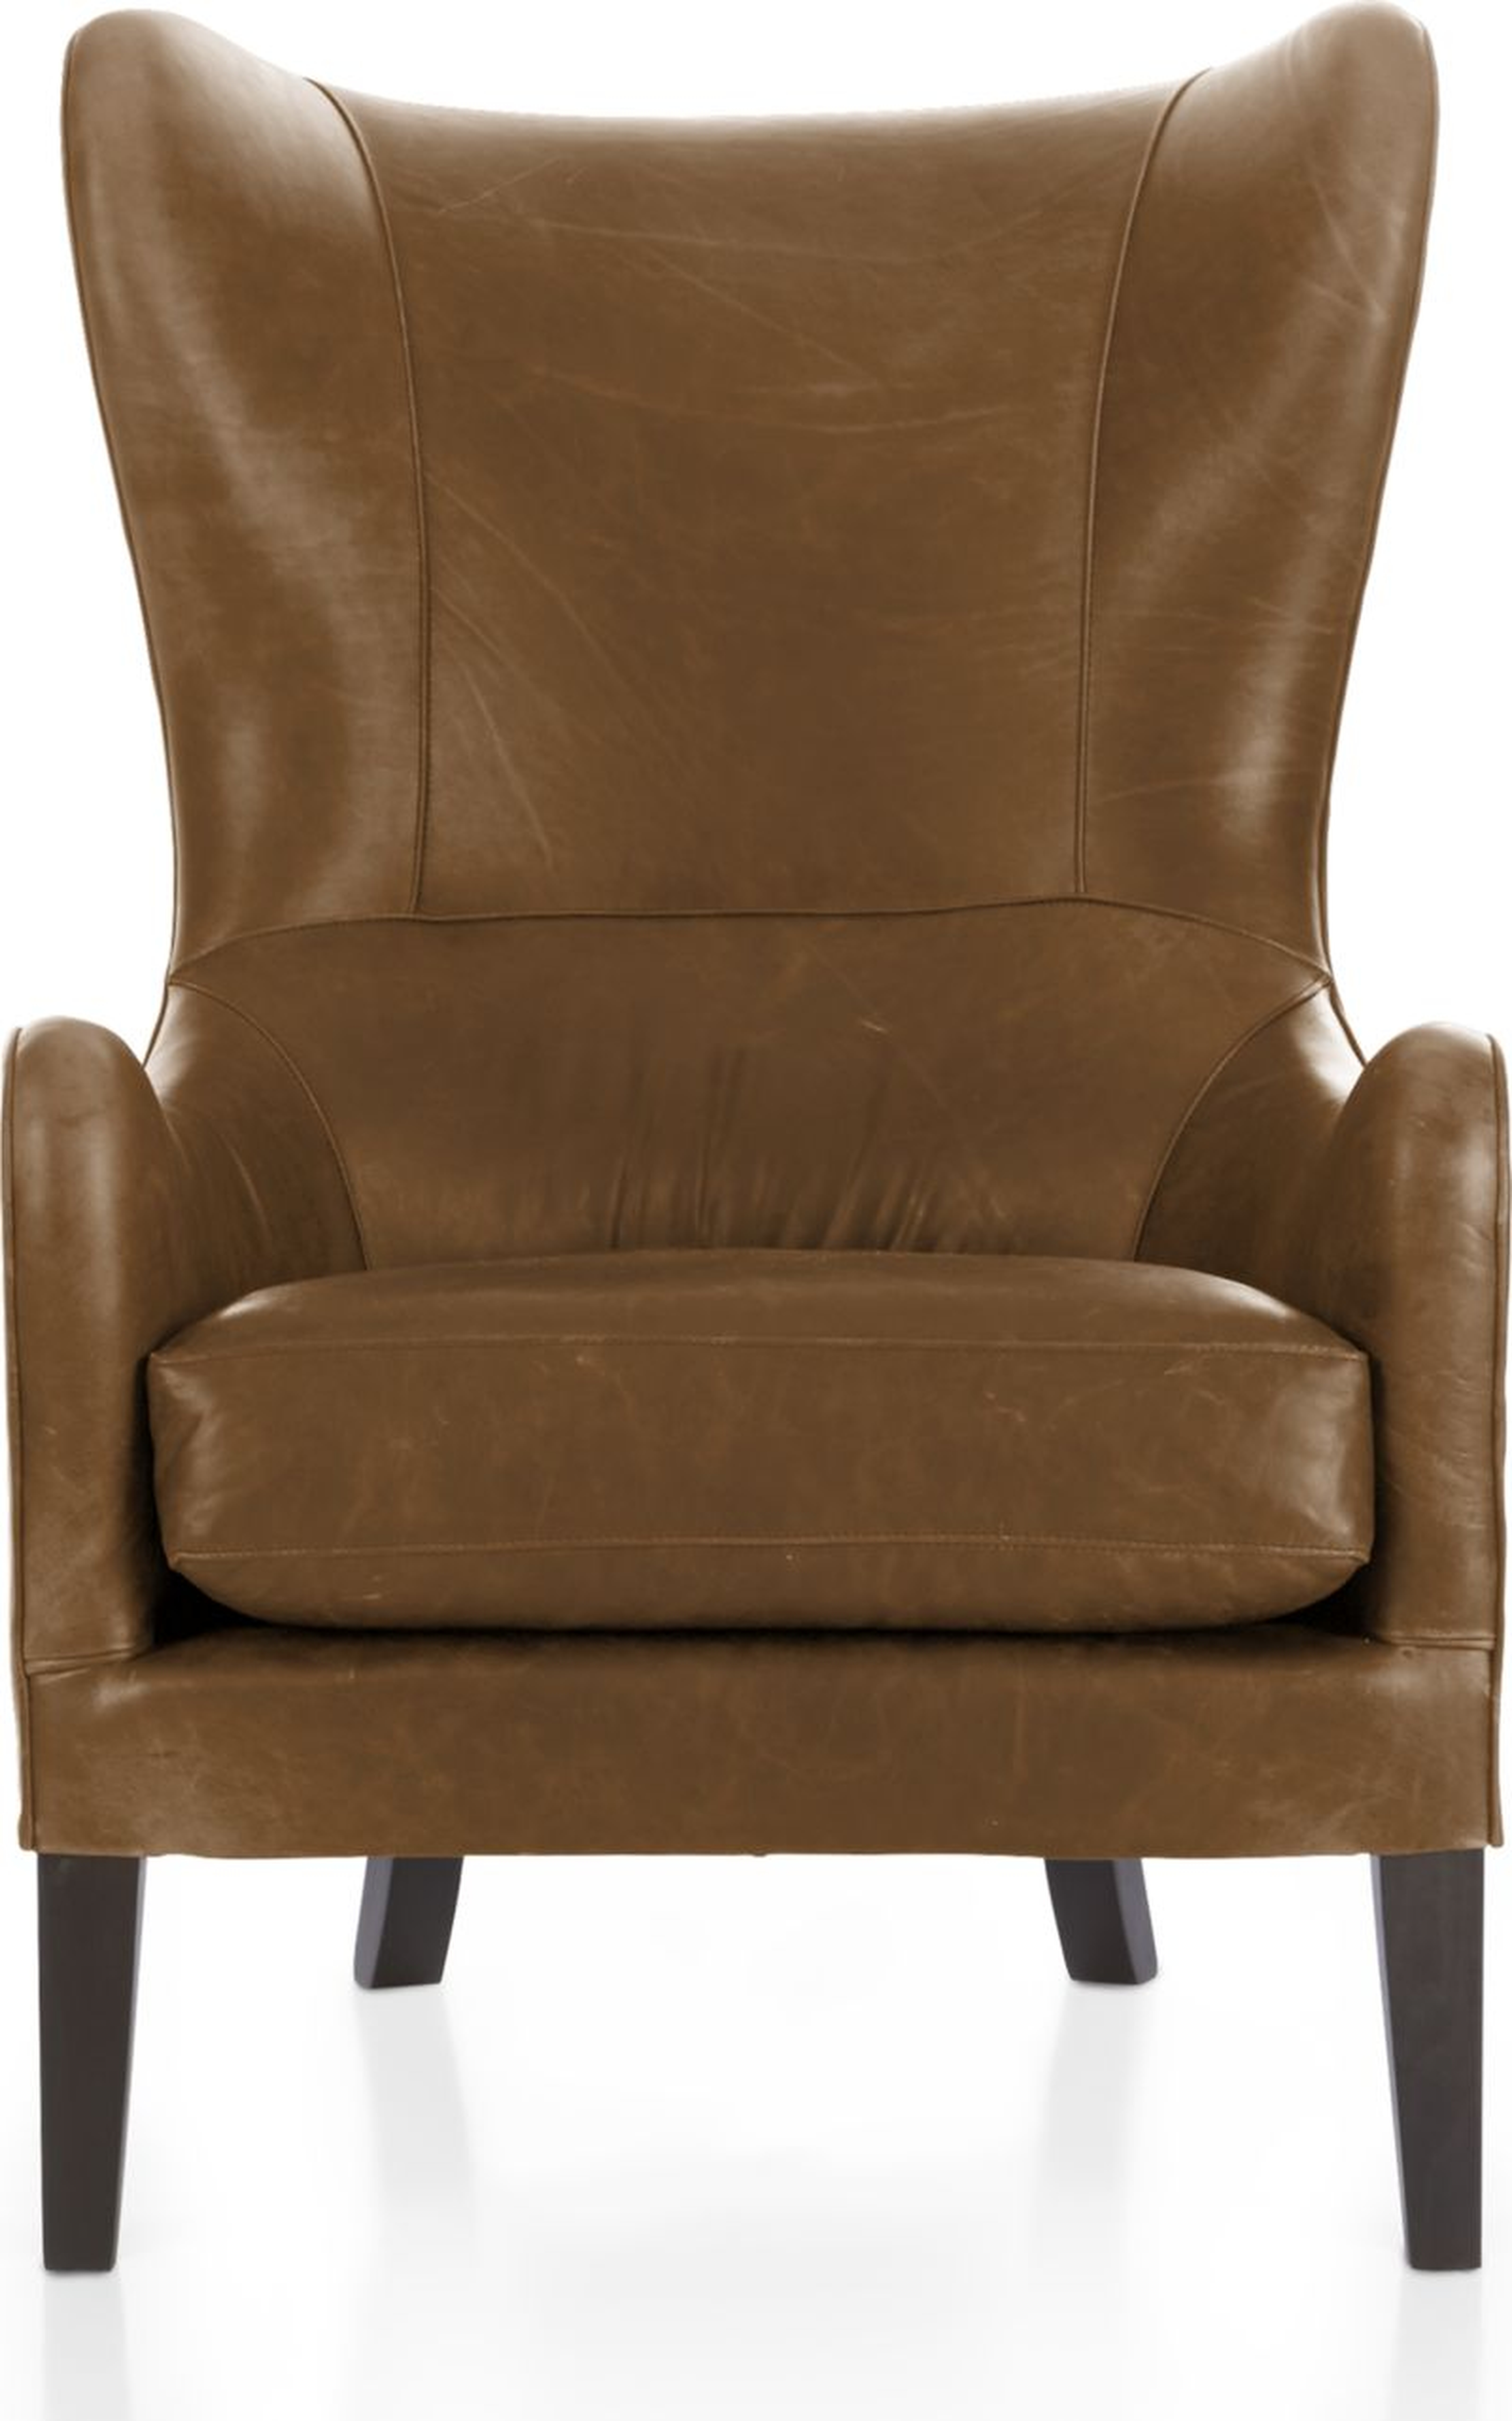 Garbo Leather Wingback Chair - Chestnut - Crate and Barrel